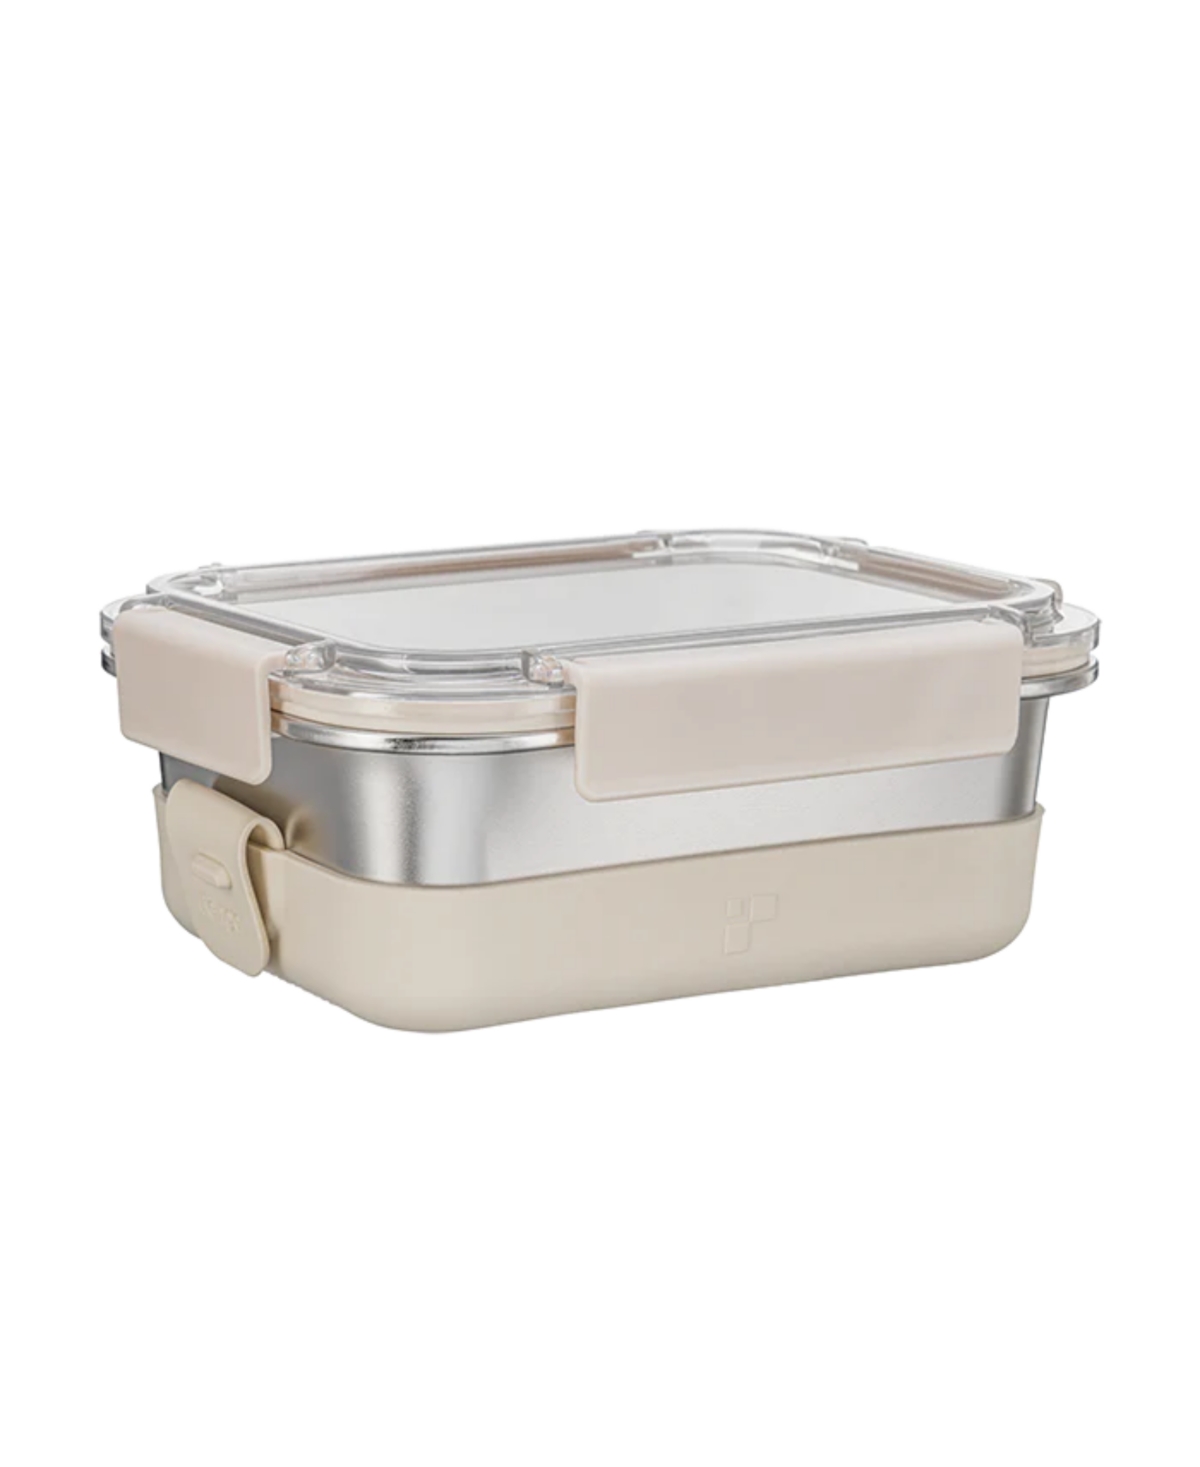 Fenger Stainless Steel Leak Resistant Container With Ms Lid And Silicone Sleeve In Creamy